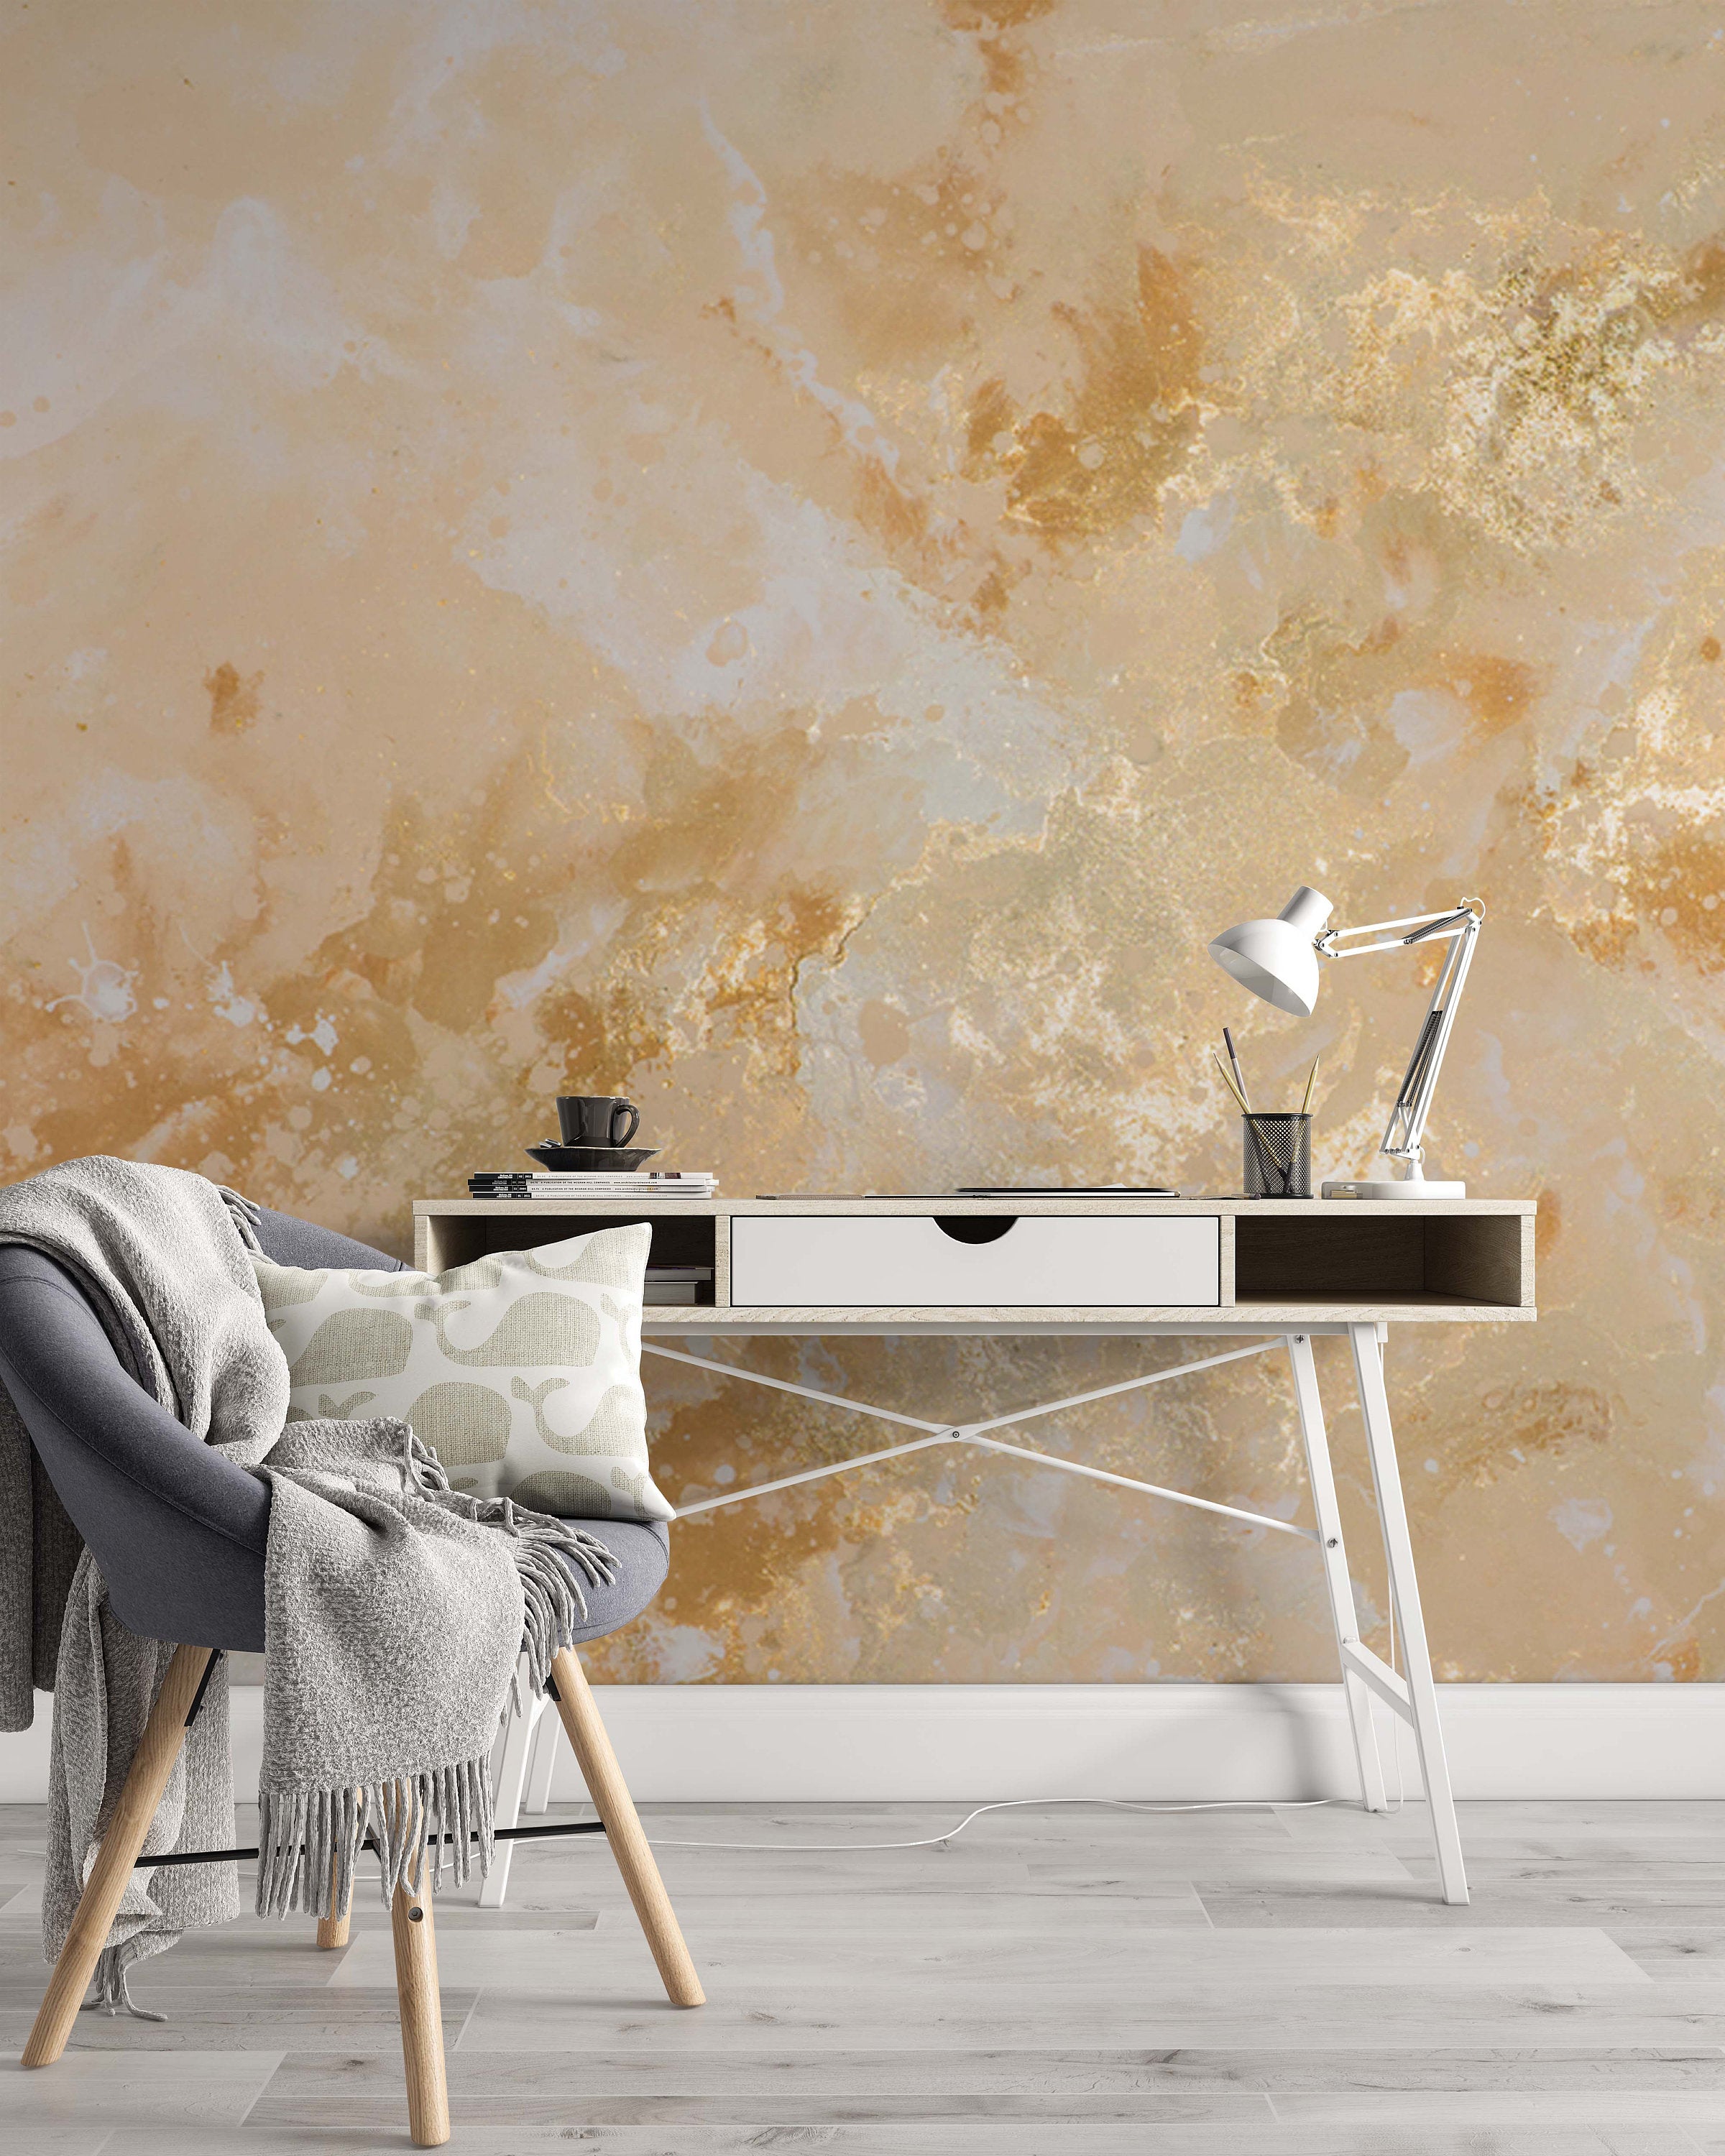 White Yellow Gold Abstract Modern Design Background Wallpaper Cafe Restaurant Decoration Living Room Bedroom Mural Home Decor Wall Art